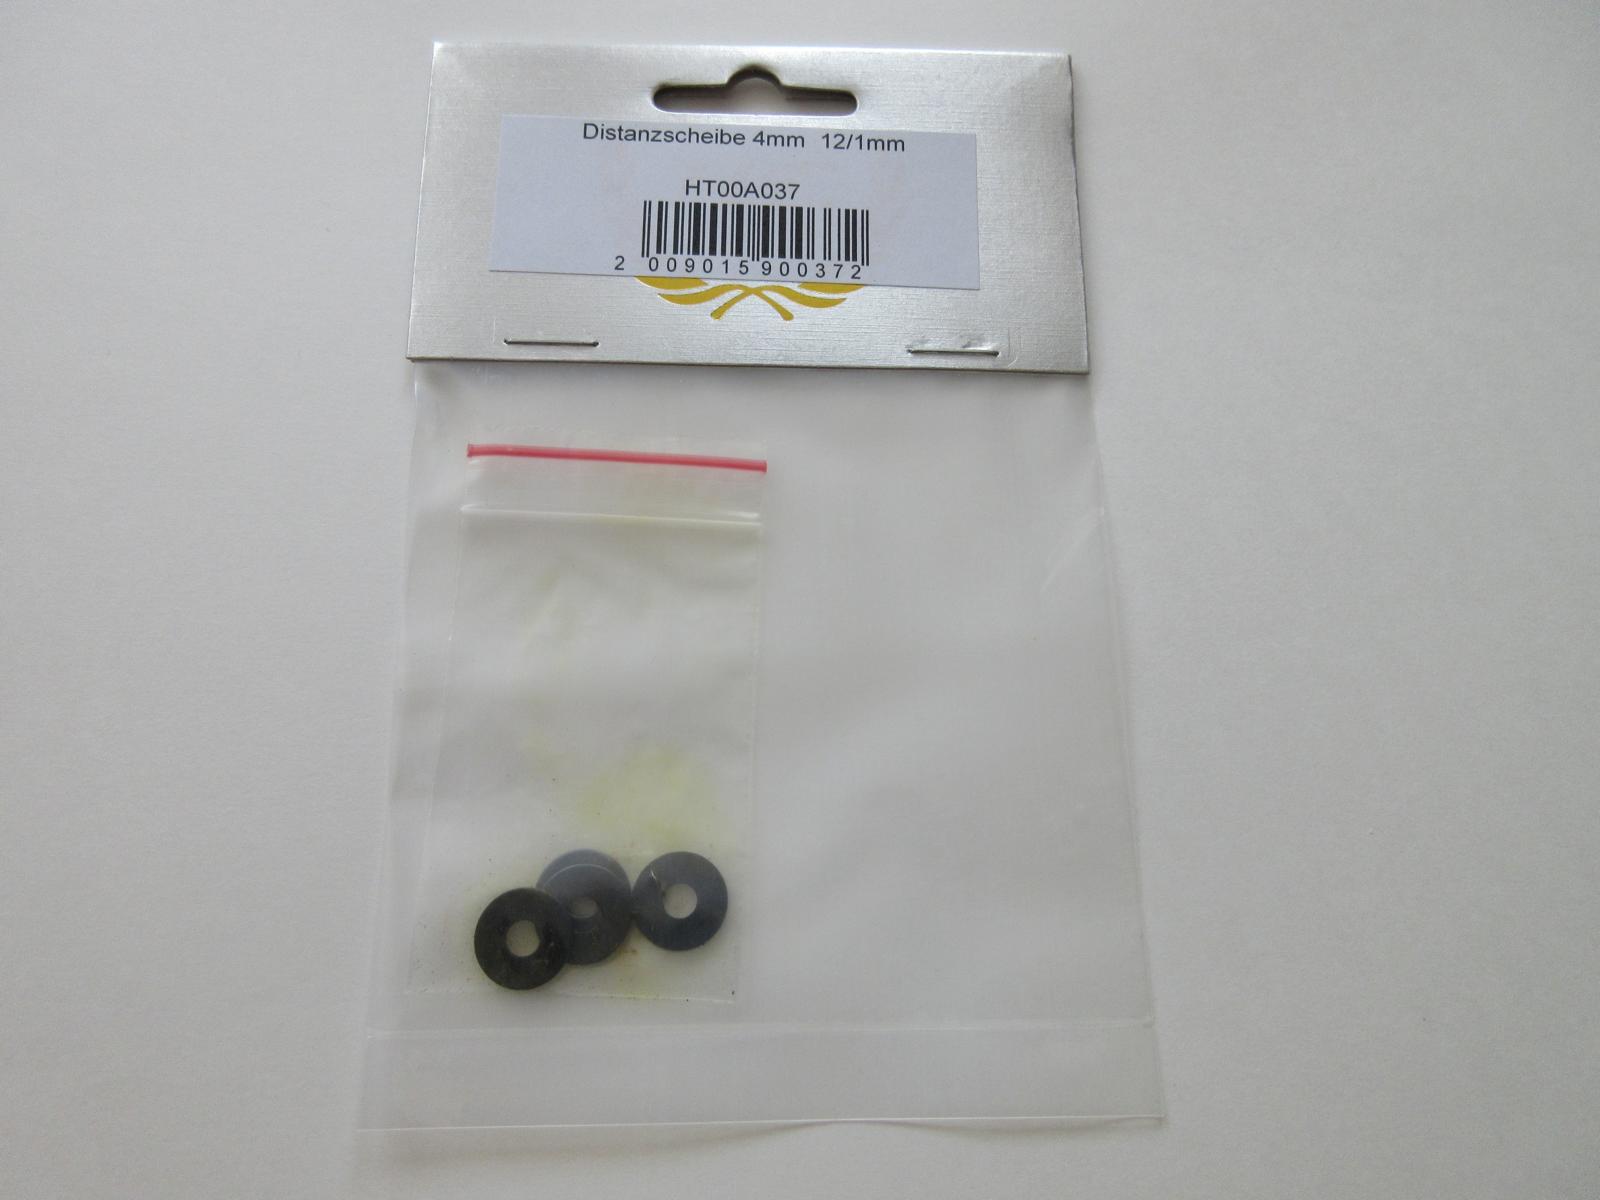 ROTOR BLADES WASHER 4MM 12/1mm